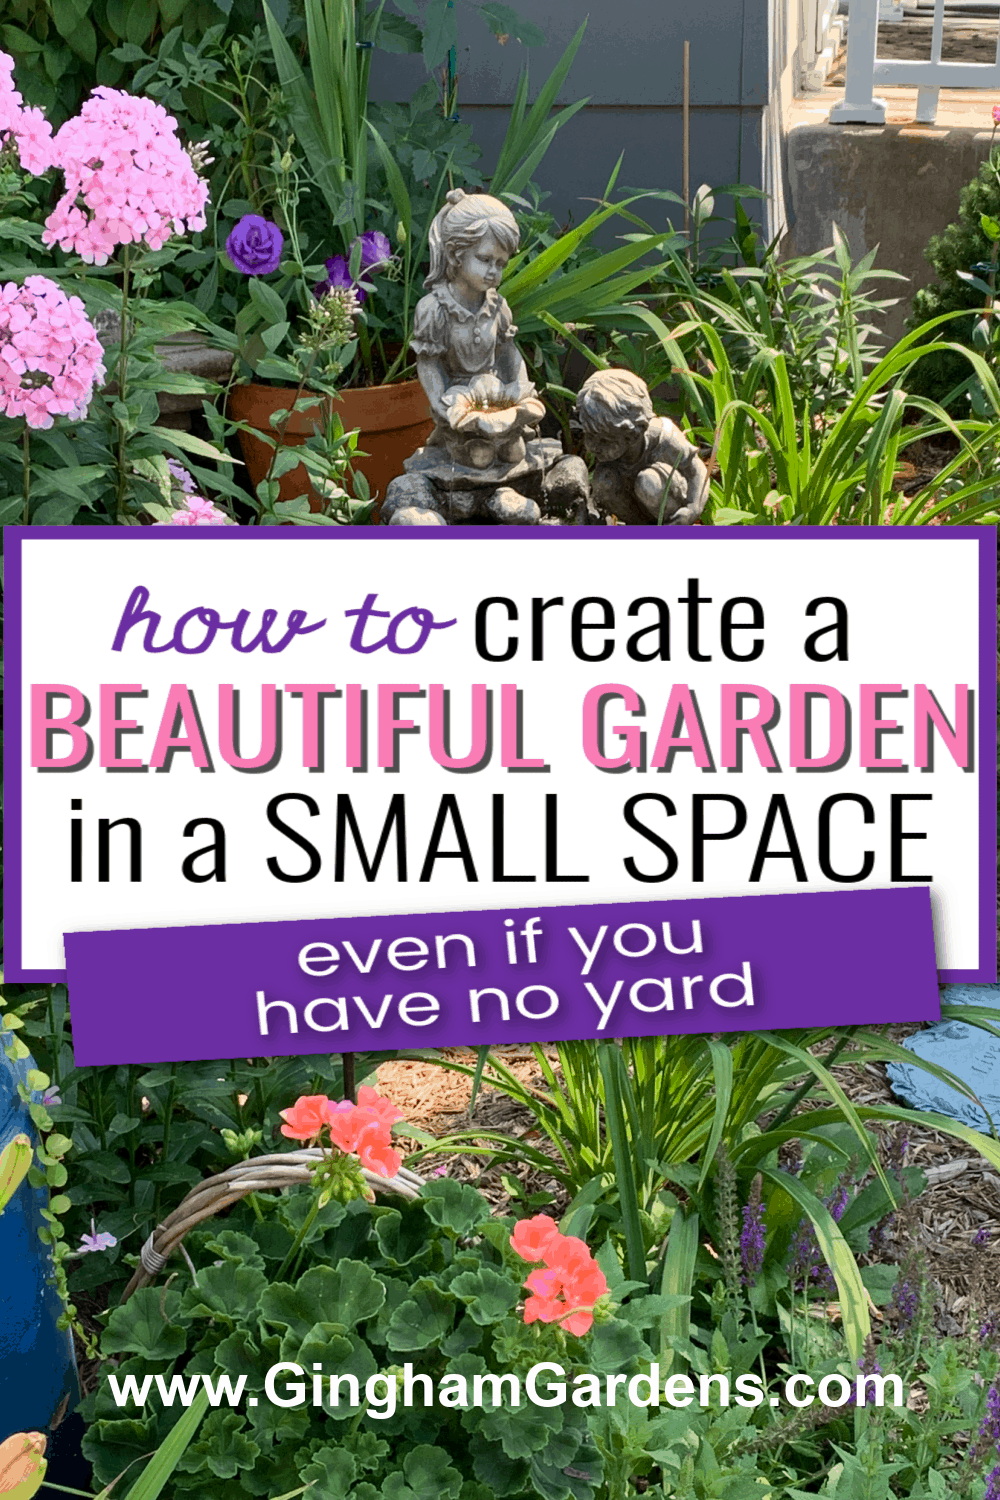 Image of a flower garden with text overlay - How to Create a Beautiful Garden in a Small Space